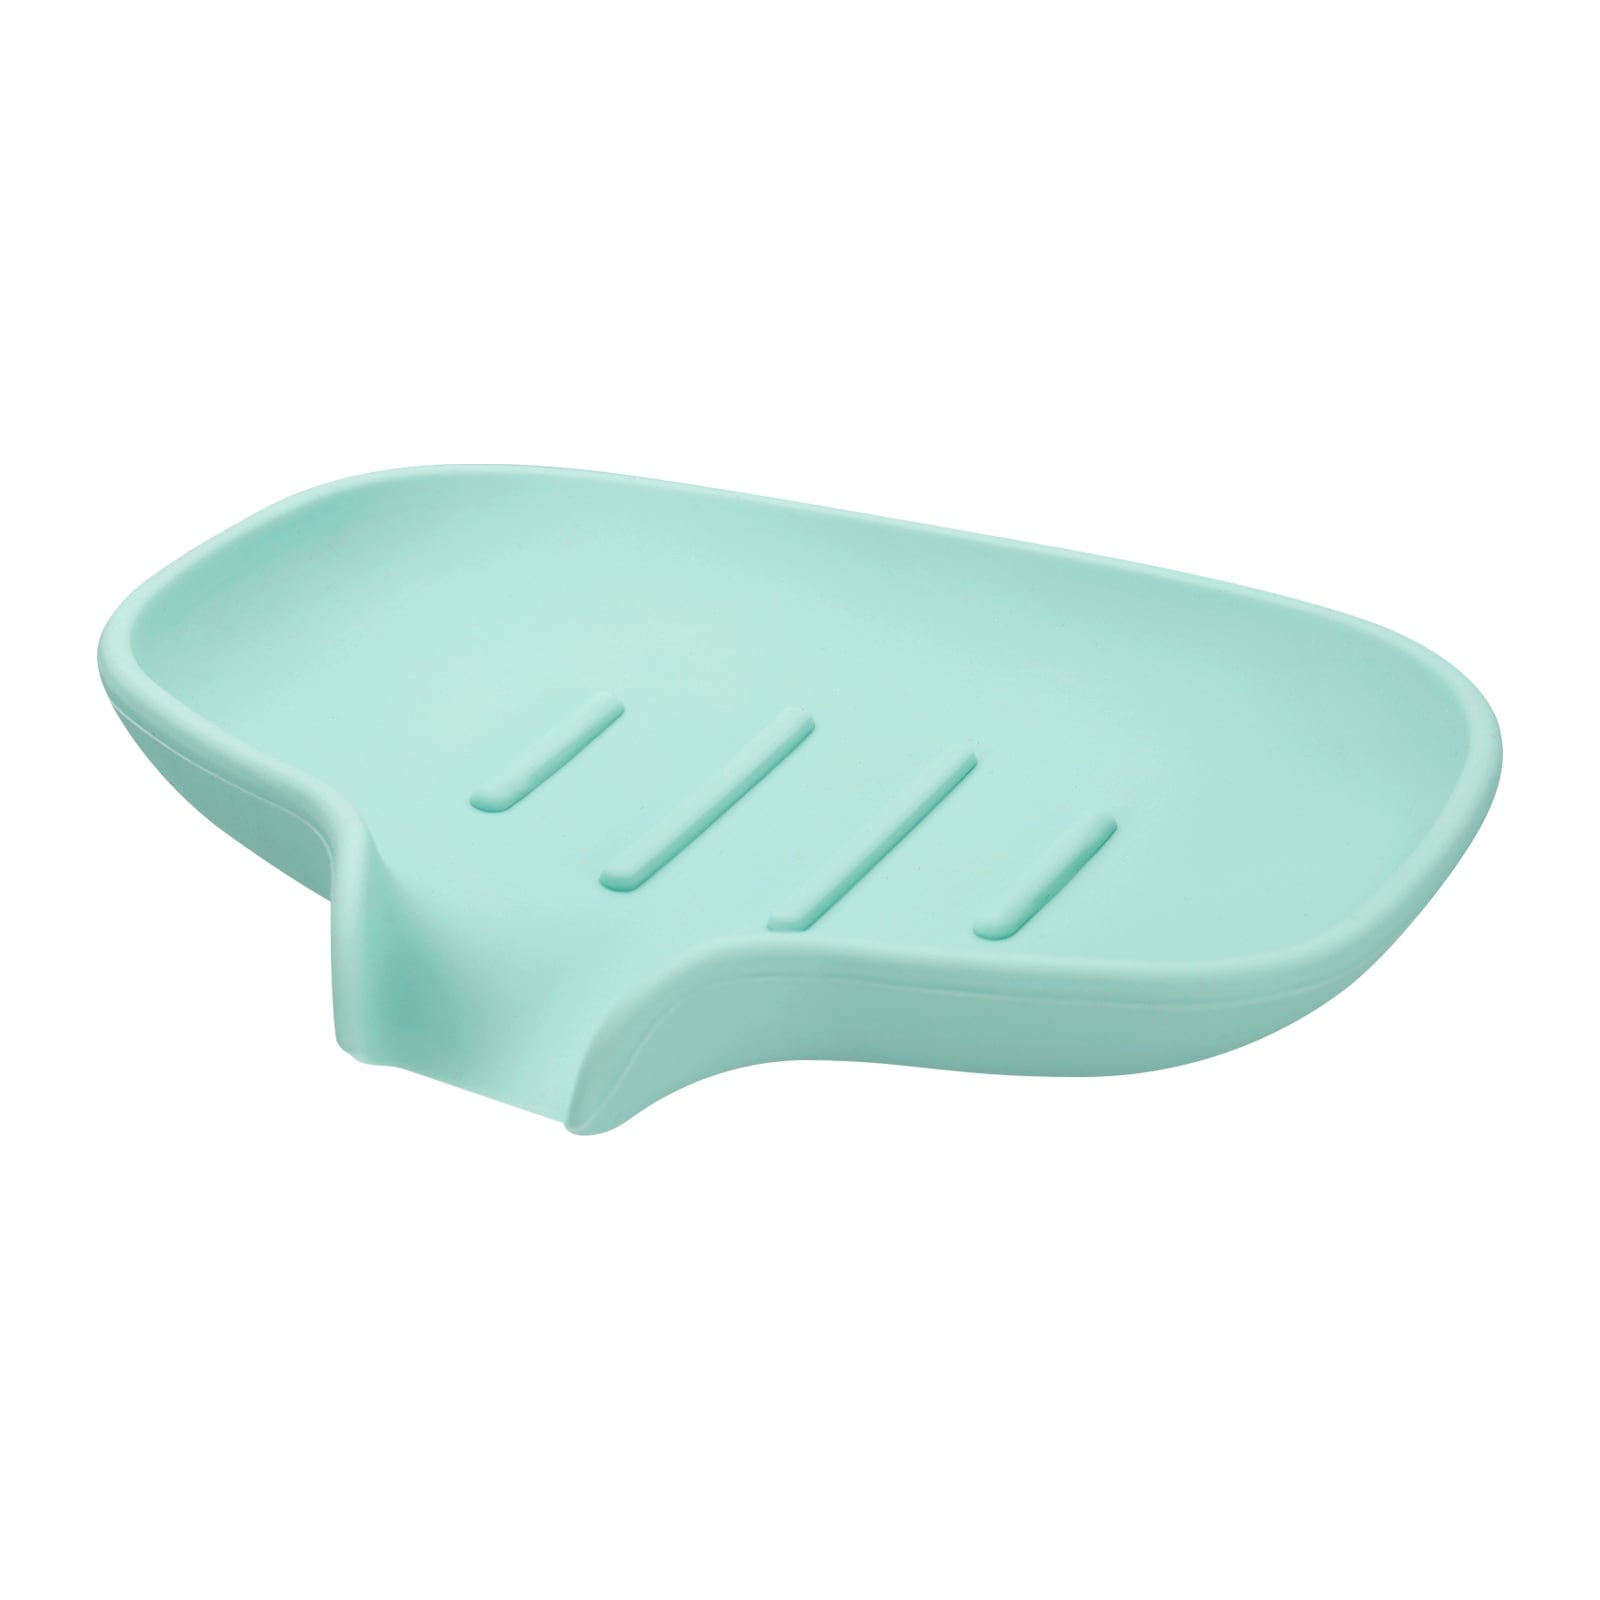 https://ak1.ostkcdn.com/images/products/is/images/direct/45ab41a9b8c217c282893f0a3635f86fa998a563/Soap-Dish-with-Drain-Tray%2C-Silicone-Self-Draining-Waterfall-Soap-Saver.jpg